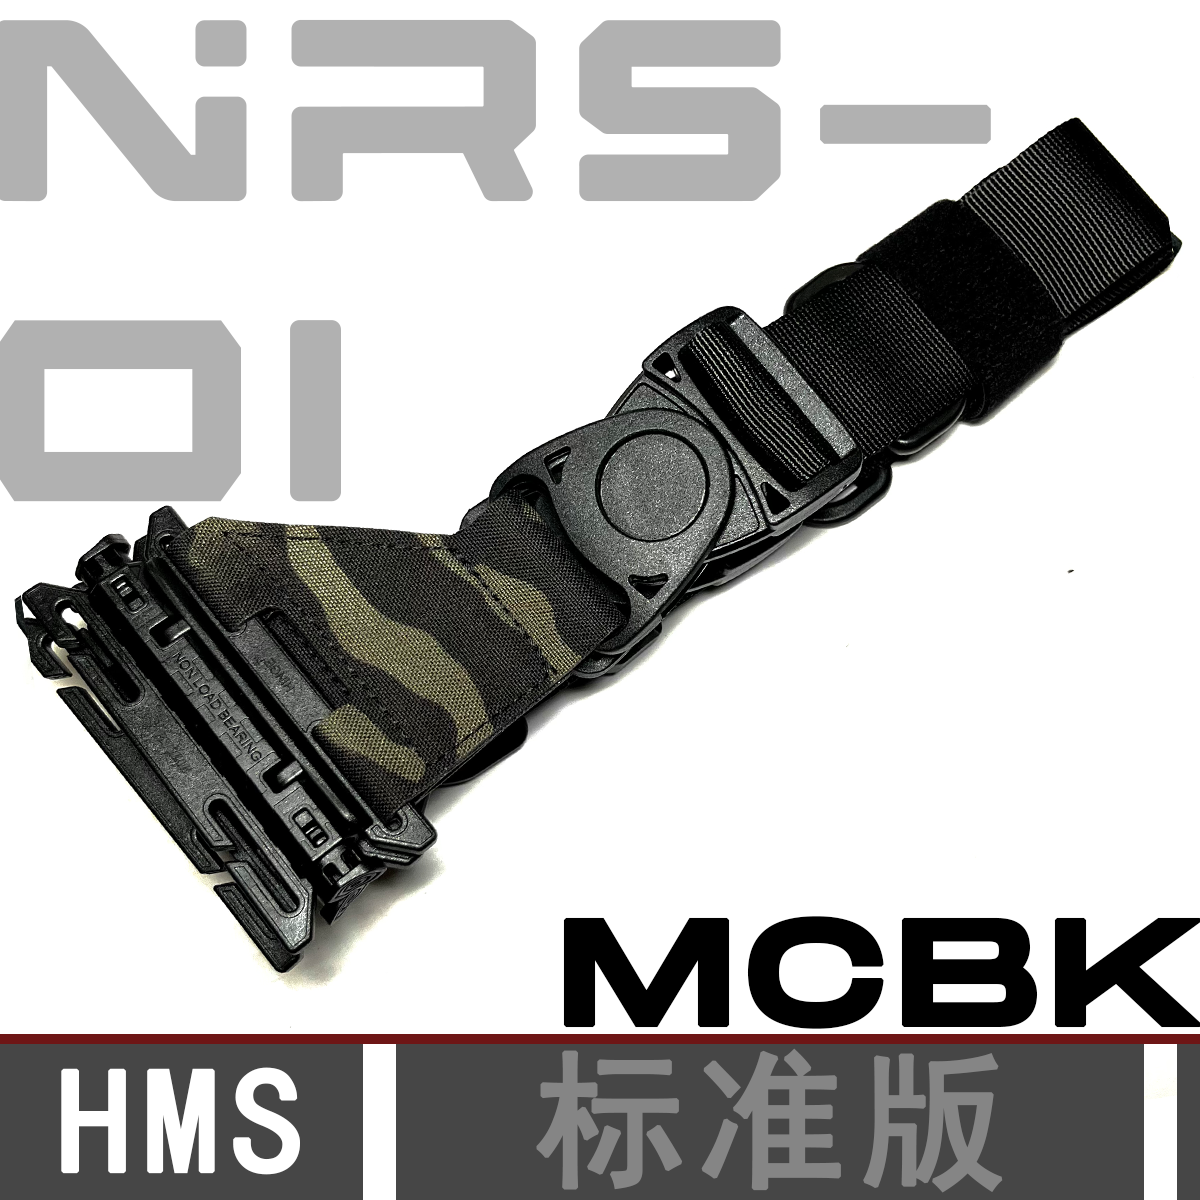 NRS-01 Magnetic Buckle Fidlock Gravity Release HMS Extended